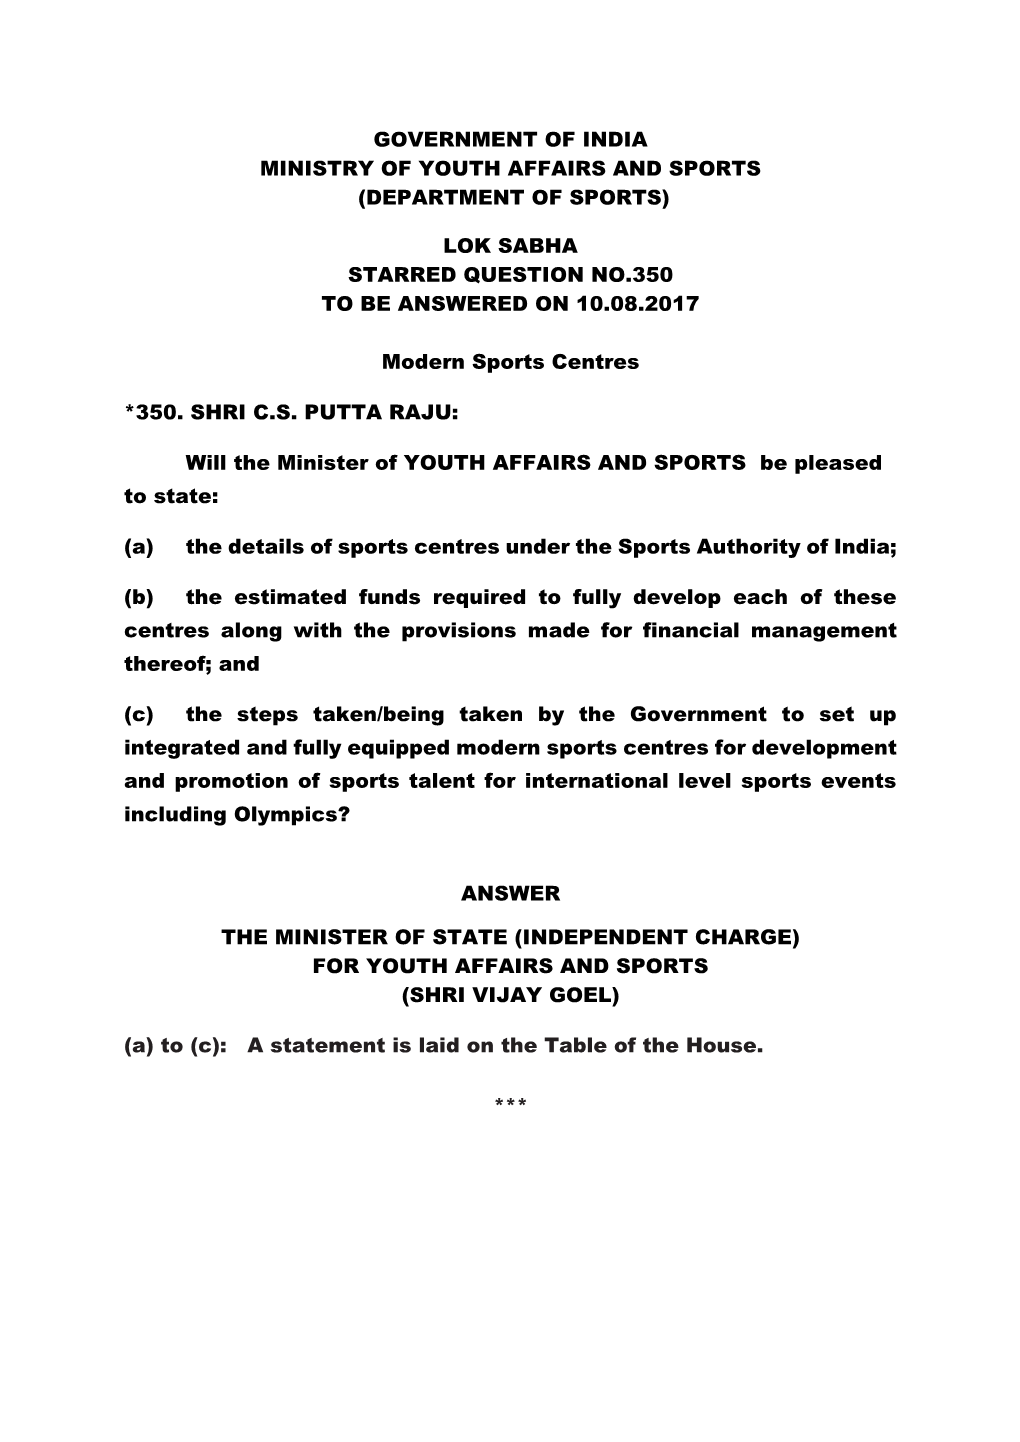 Lok Sabha Starred Question No.350 to Be Answered on 10.08.2017